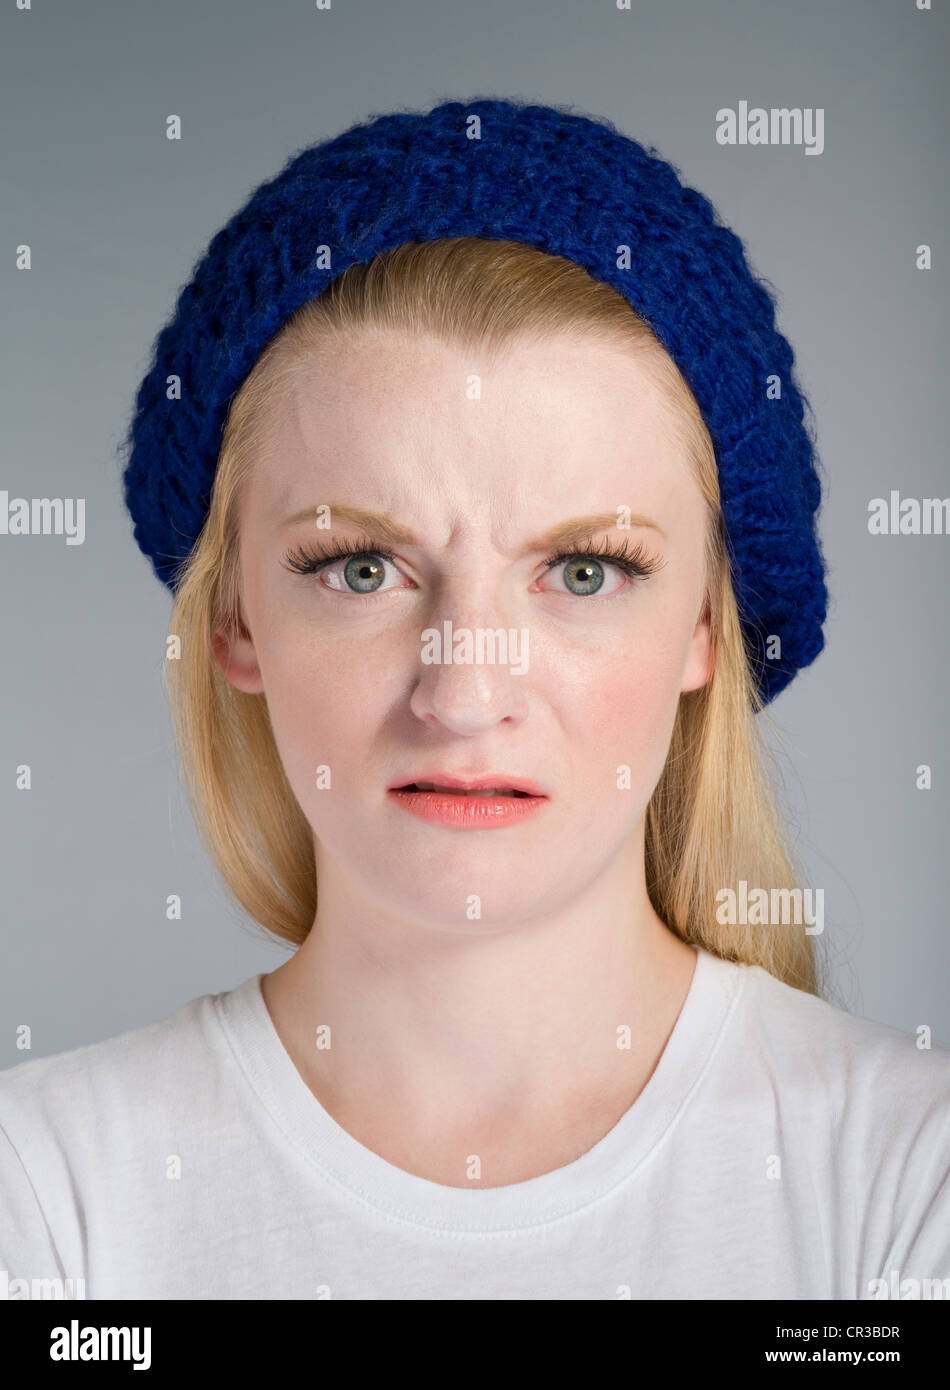 Pale complexion Caucasian girl with blonde / blond hair in her twenties Stock Photo